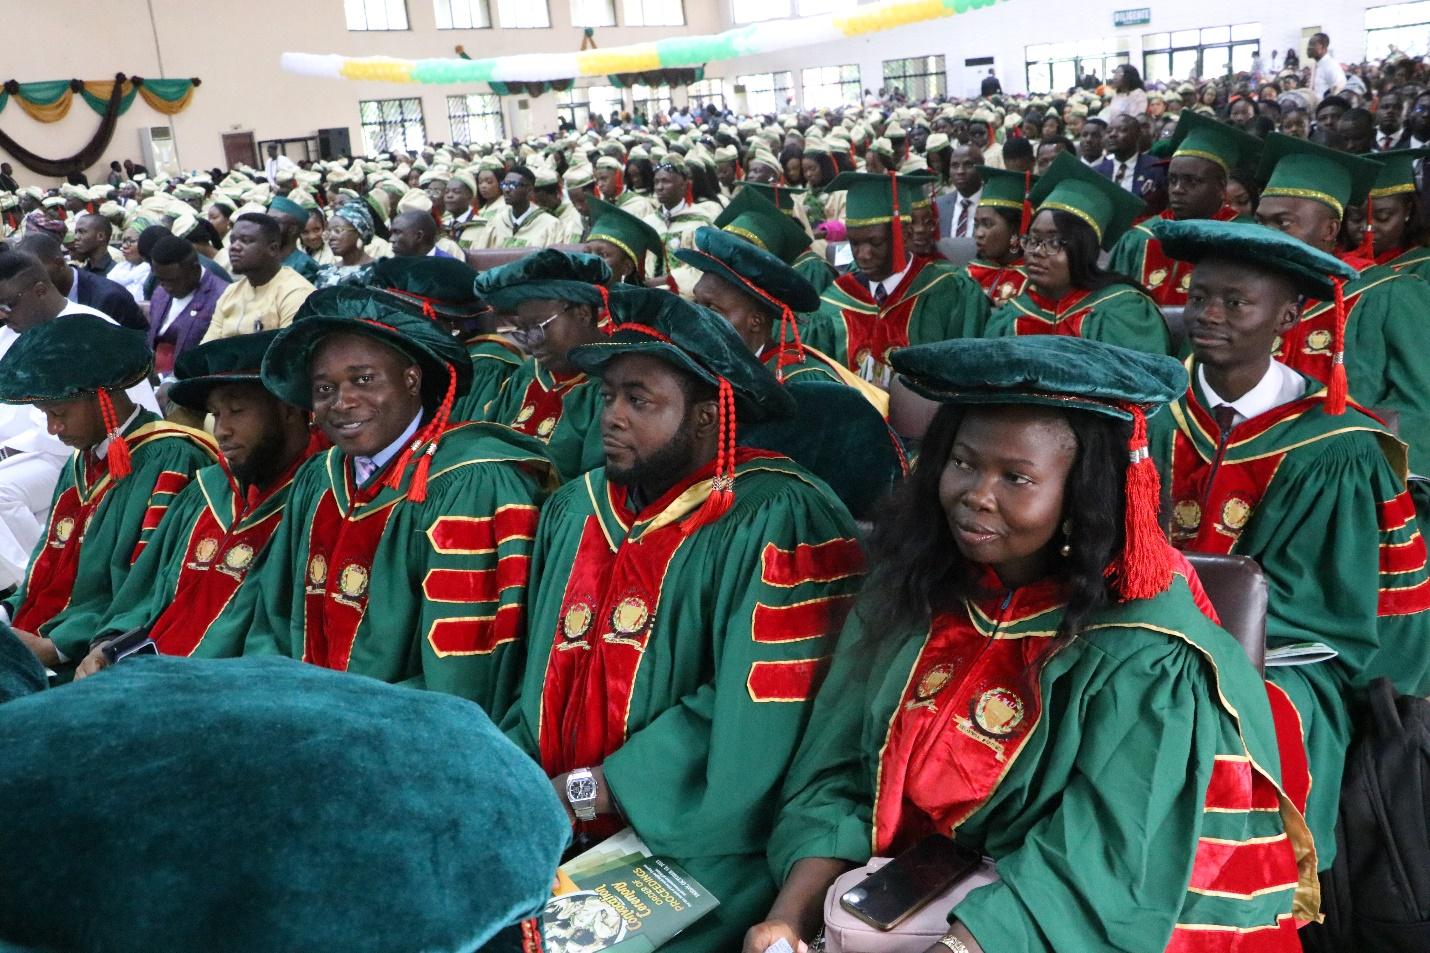 C:\Users\USER\Downloads\A cross-section of Doctoral Graduands at the Landmark University 10th Convocation ceremony.JPG